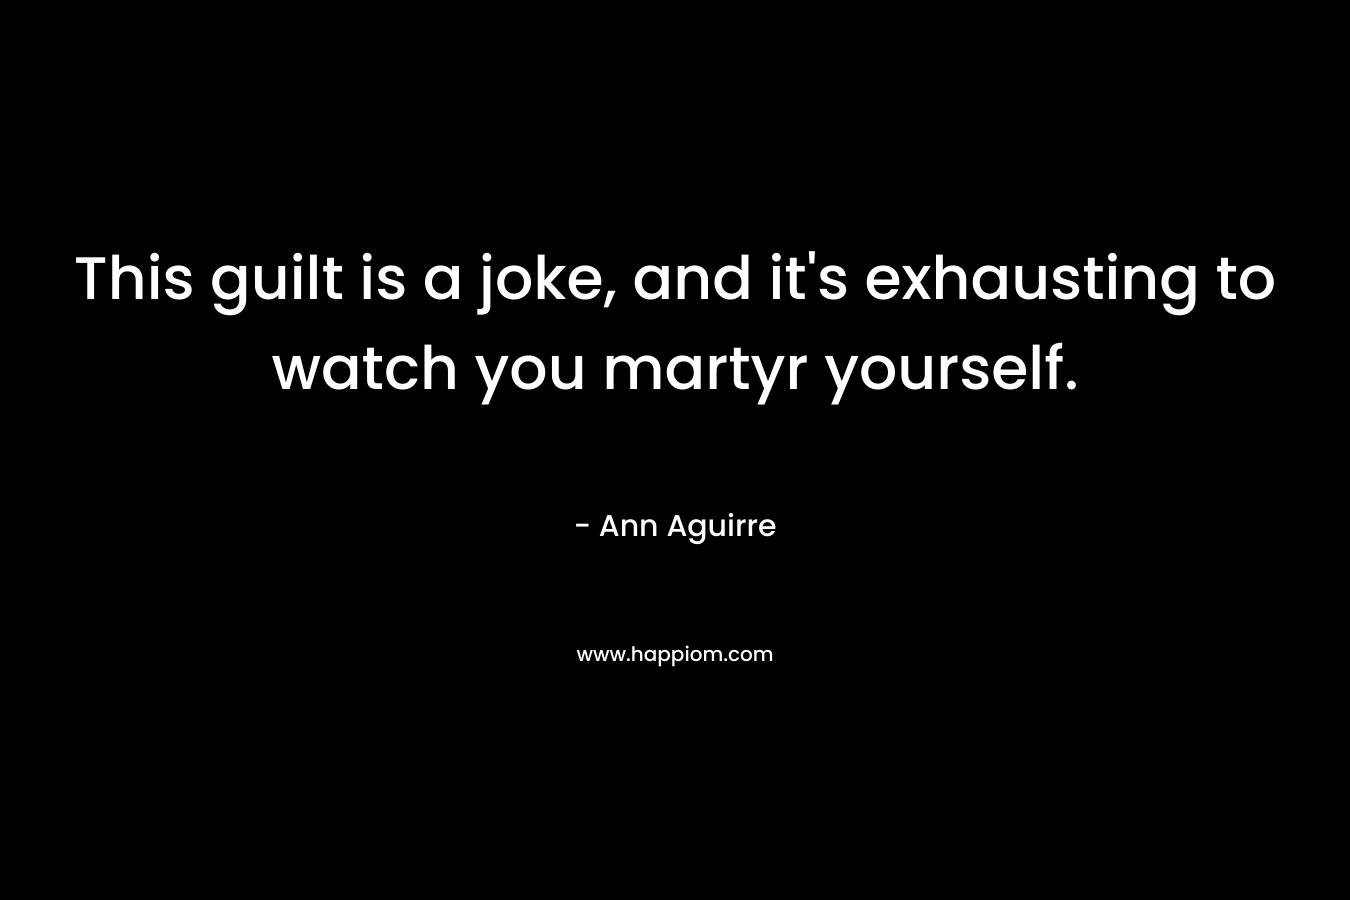 This guilt is a joke, and it’s exhausting to watch you martyr yourself. – Ann Aguirre